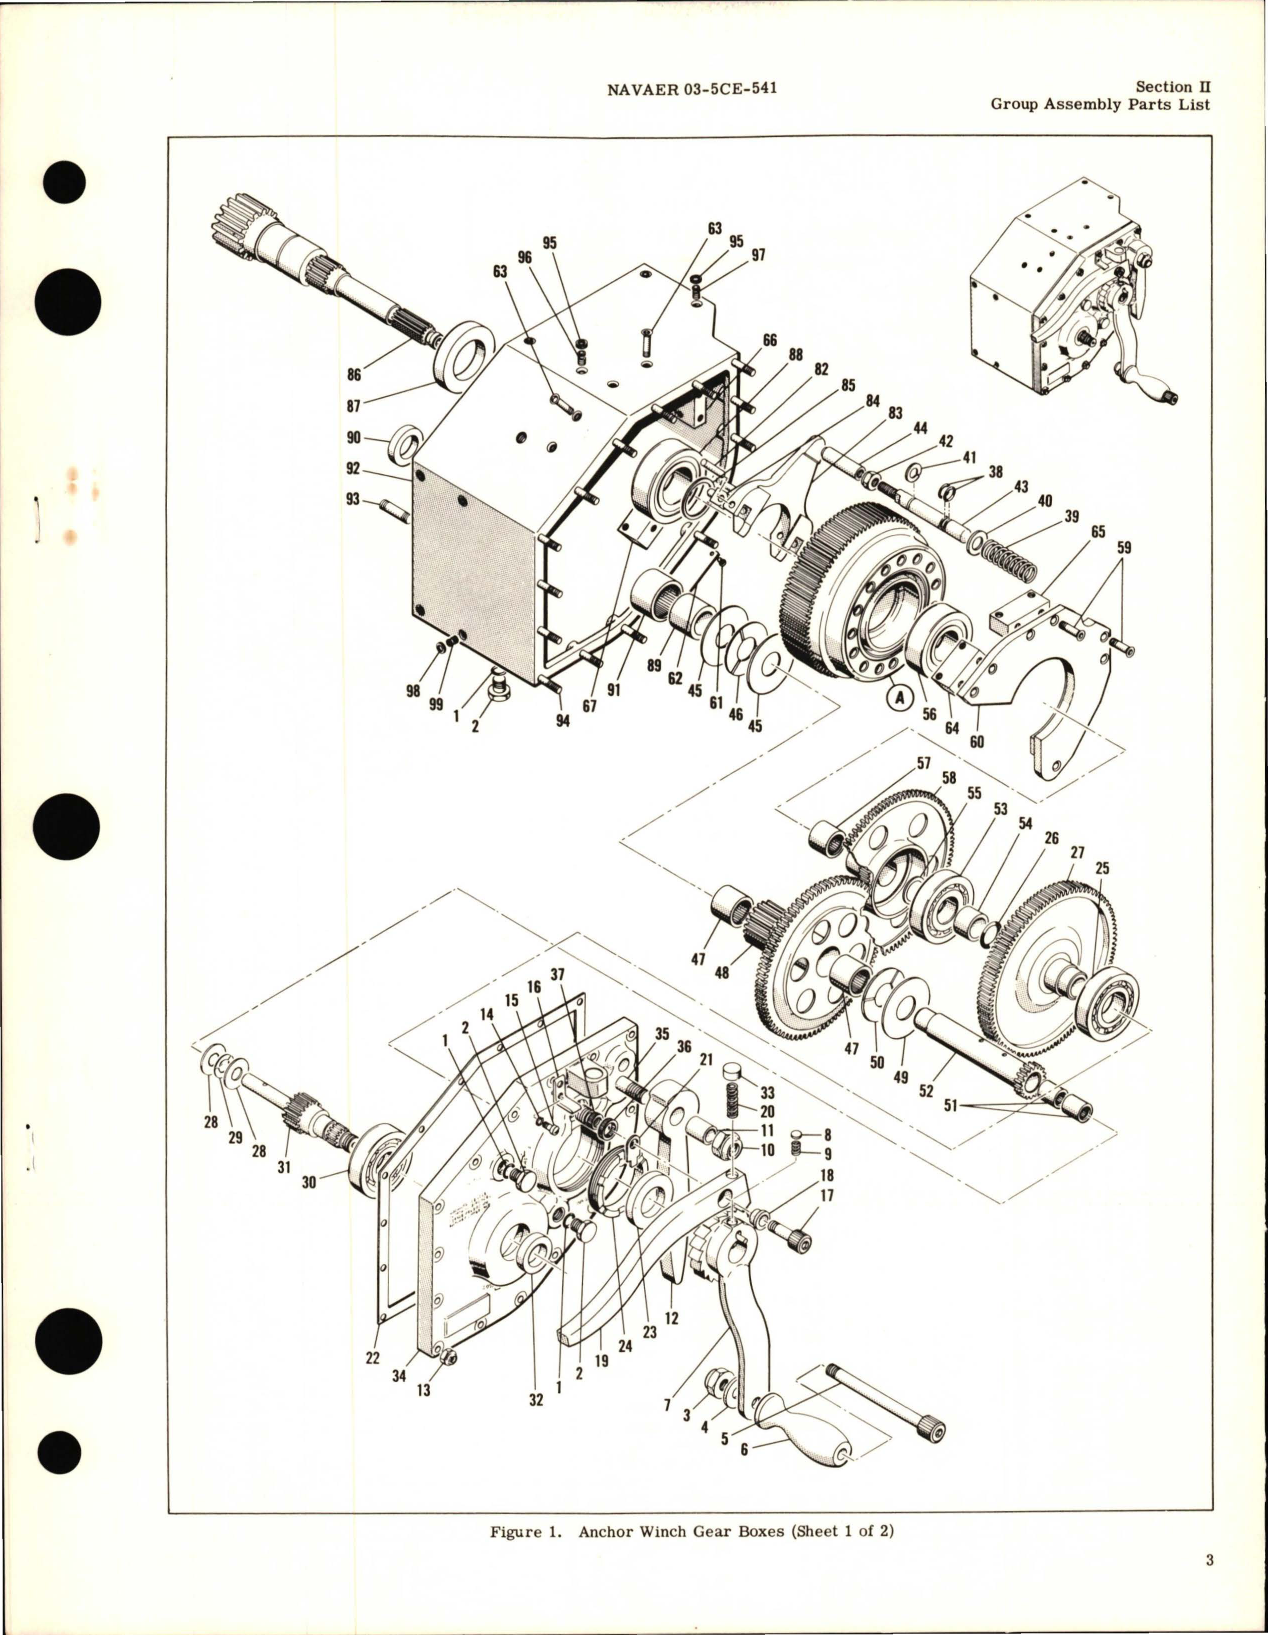 Sample page 5 from AirCorps Library document: Illustrated Parts Breakdown for Anchor Winch Gear Boxes - Part 5044-2 and 5044-3 